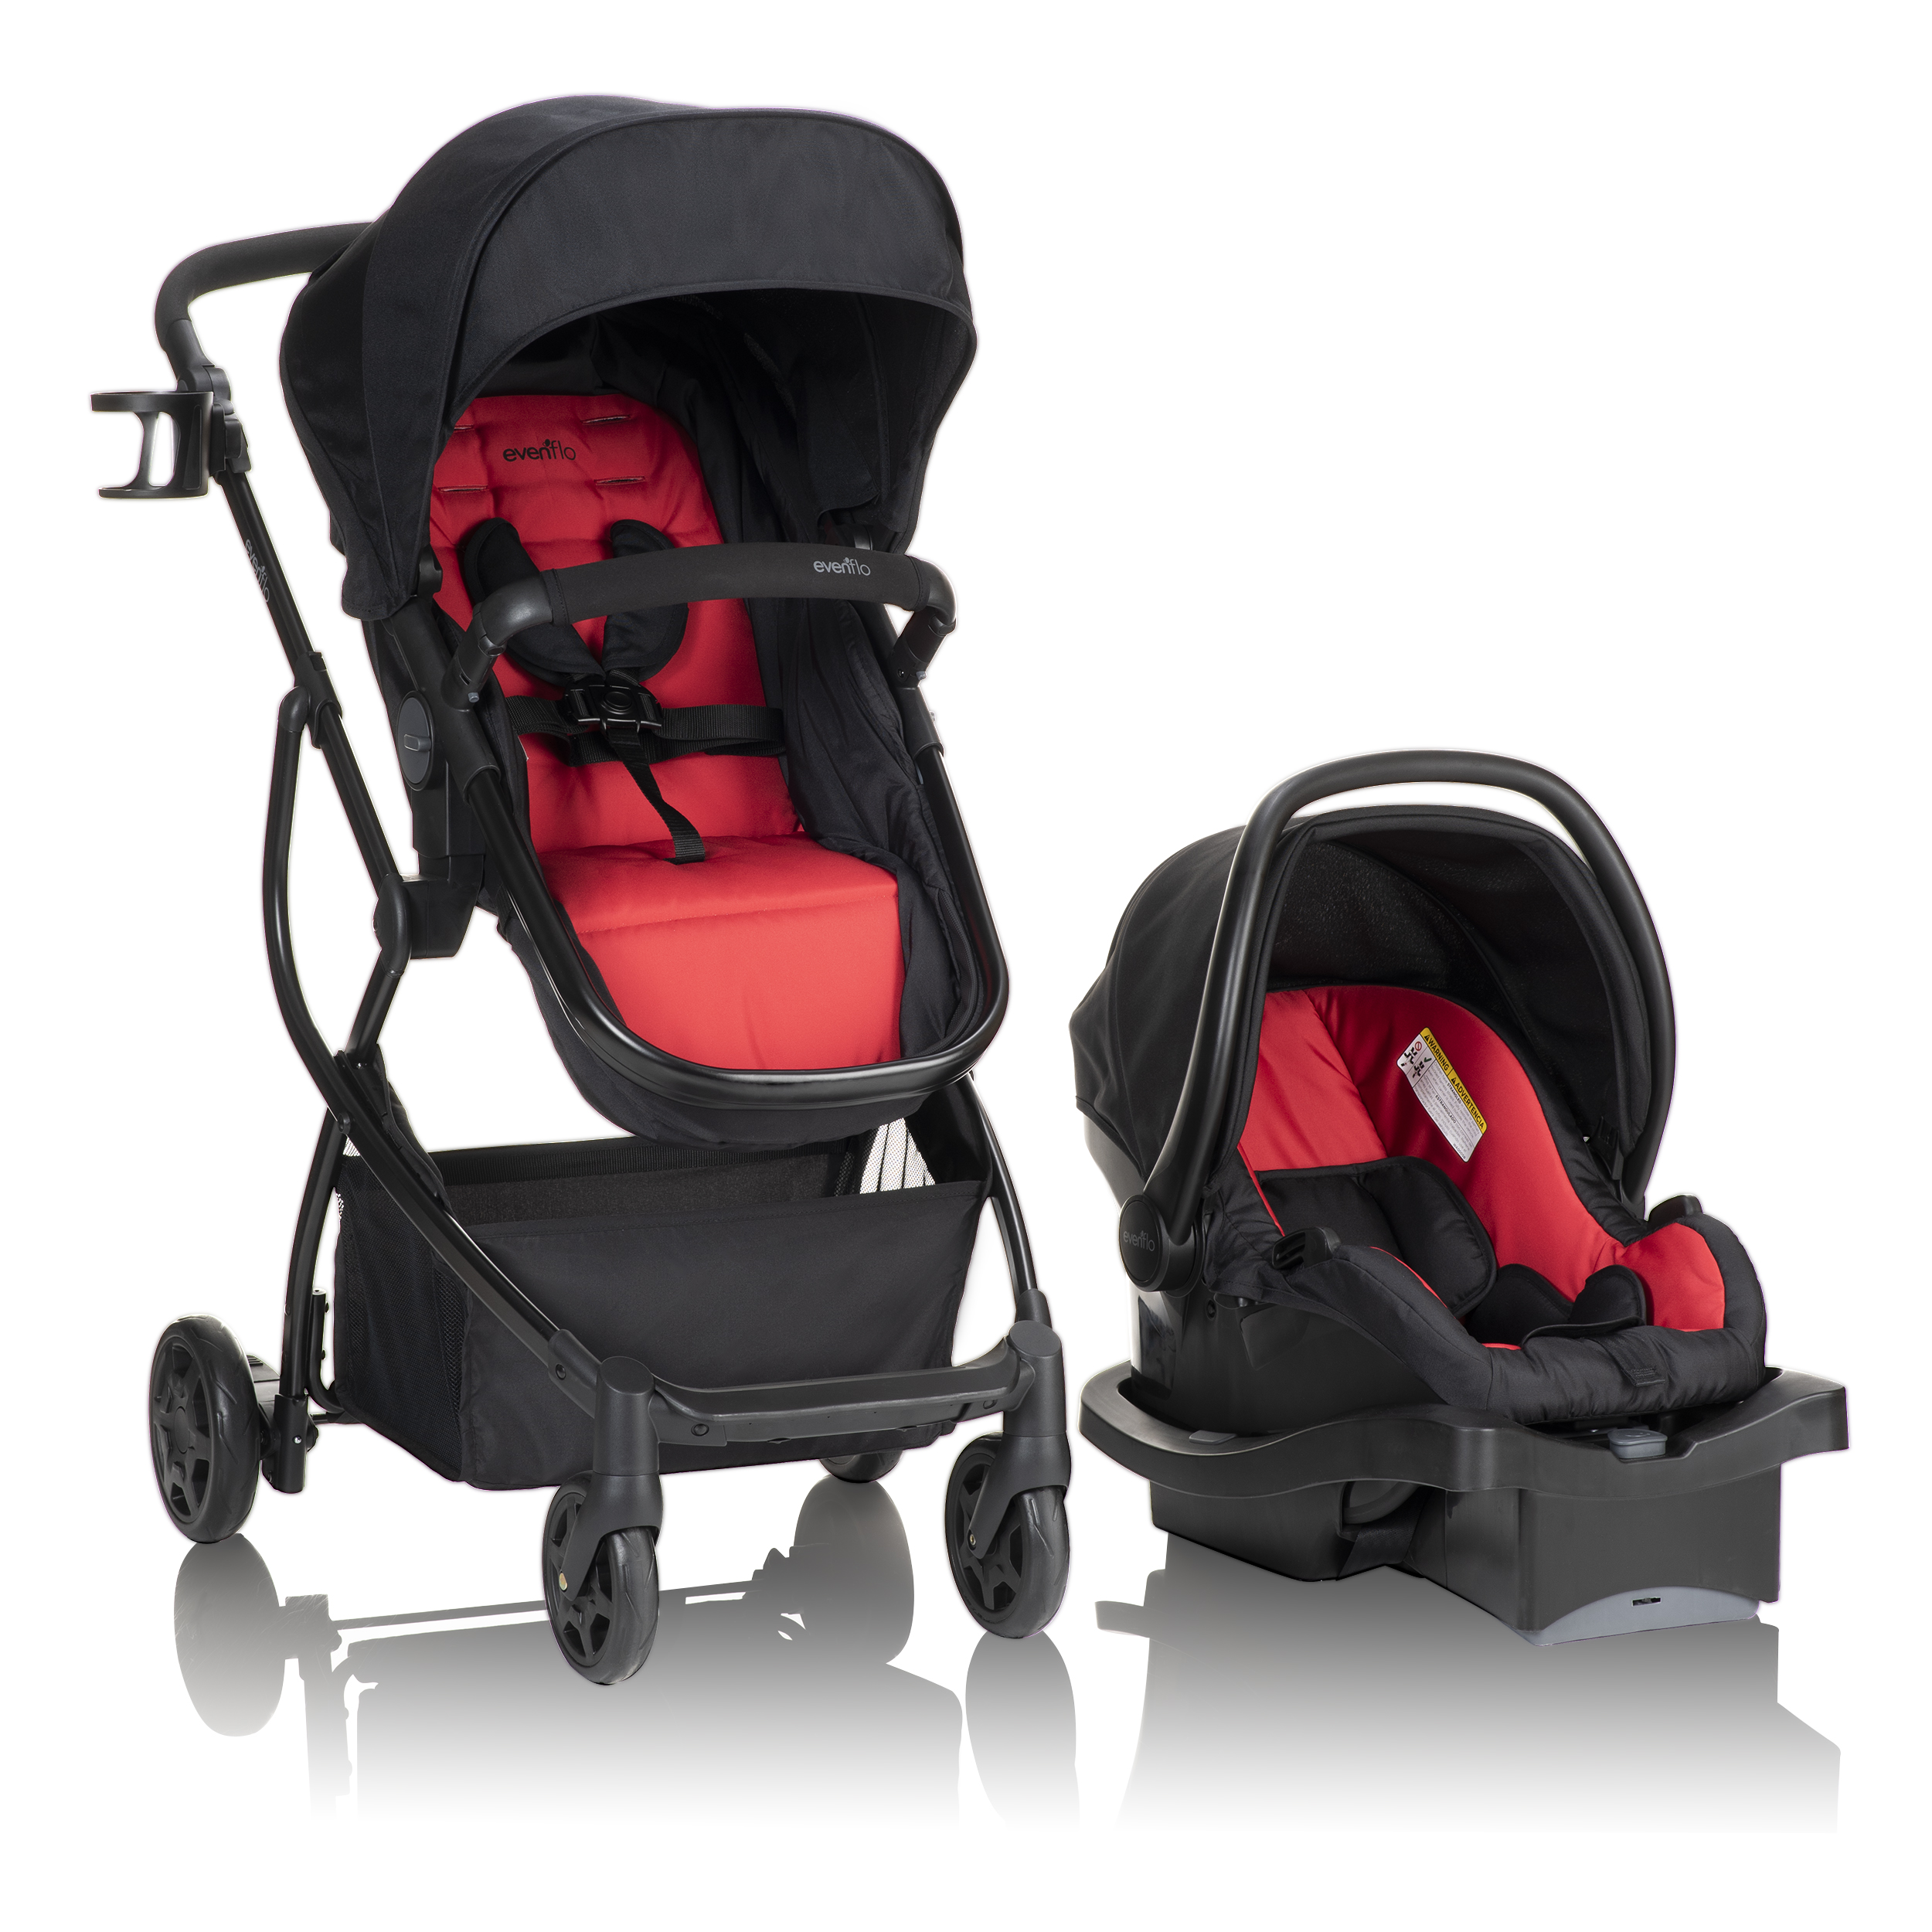 Evenflo Travel System Only $99...